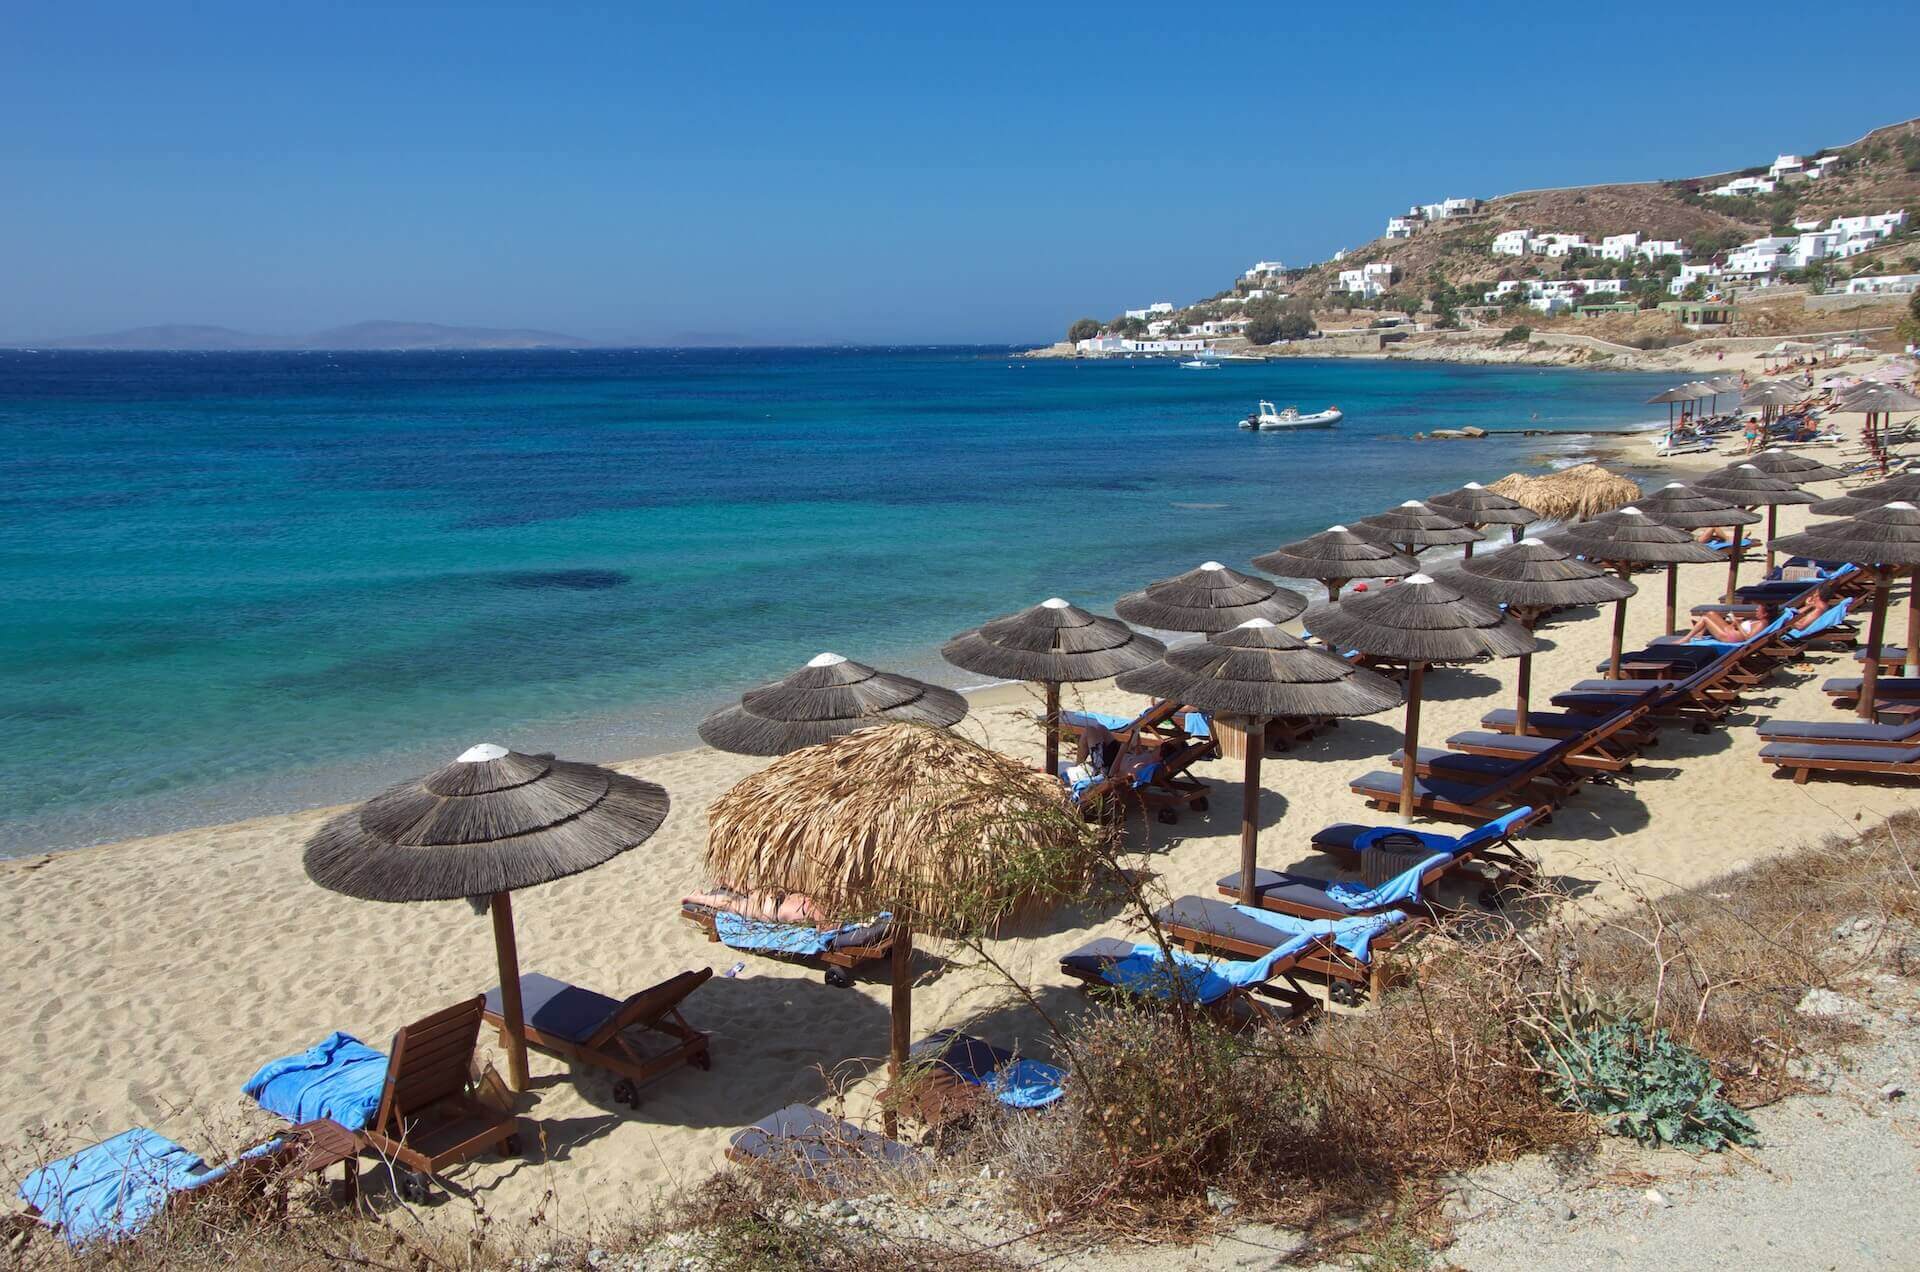 Umbrellas and sunbeds on the beach in Mykonos